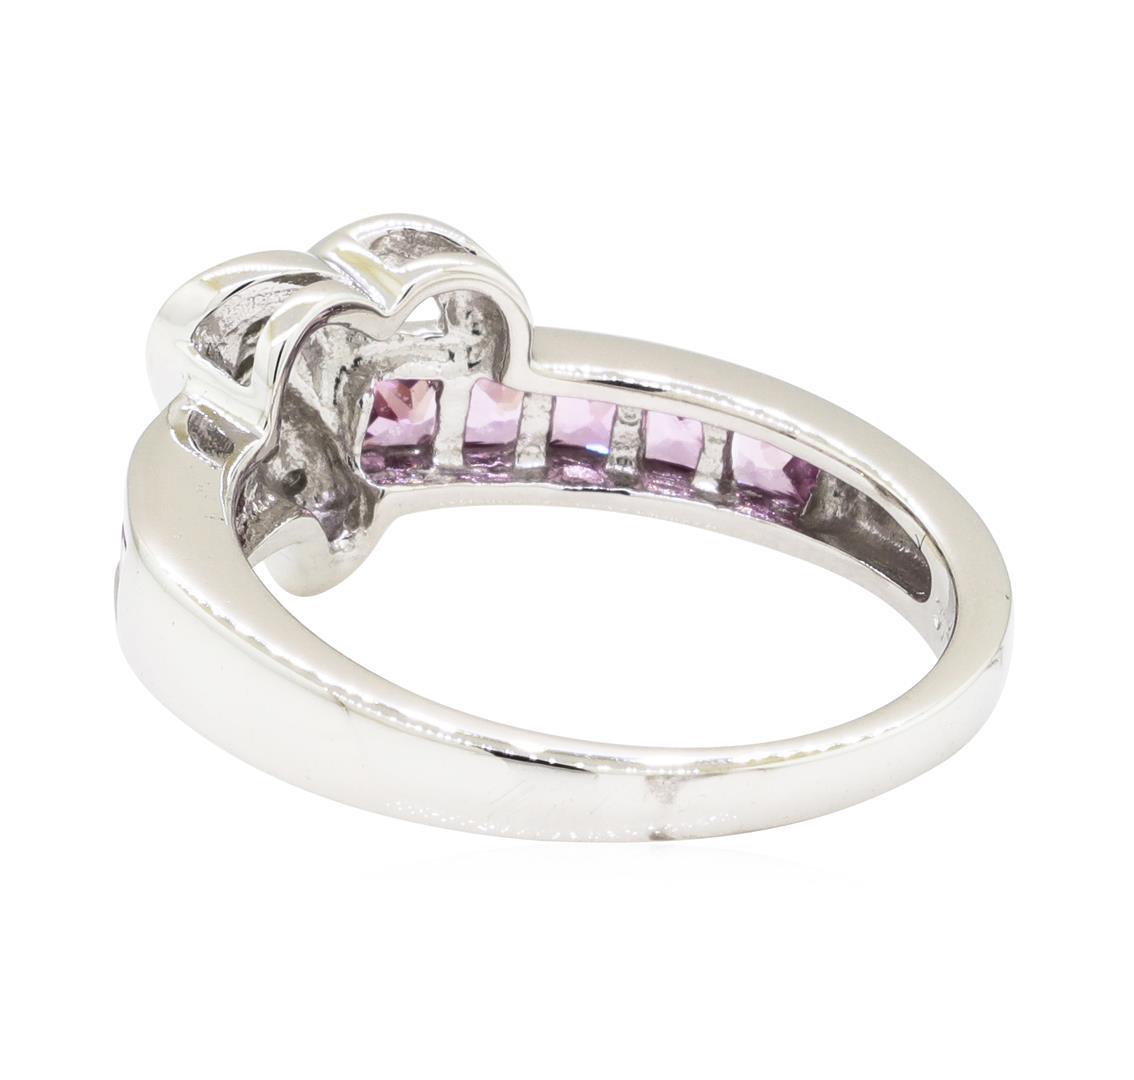 0.50 ctw Pink Sapphire and Diamond Ring - 10KT White Gold